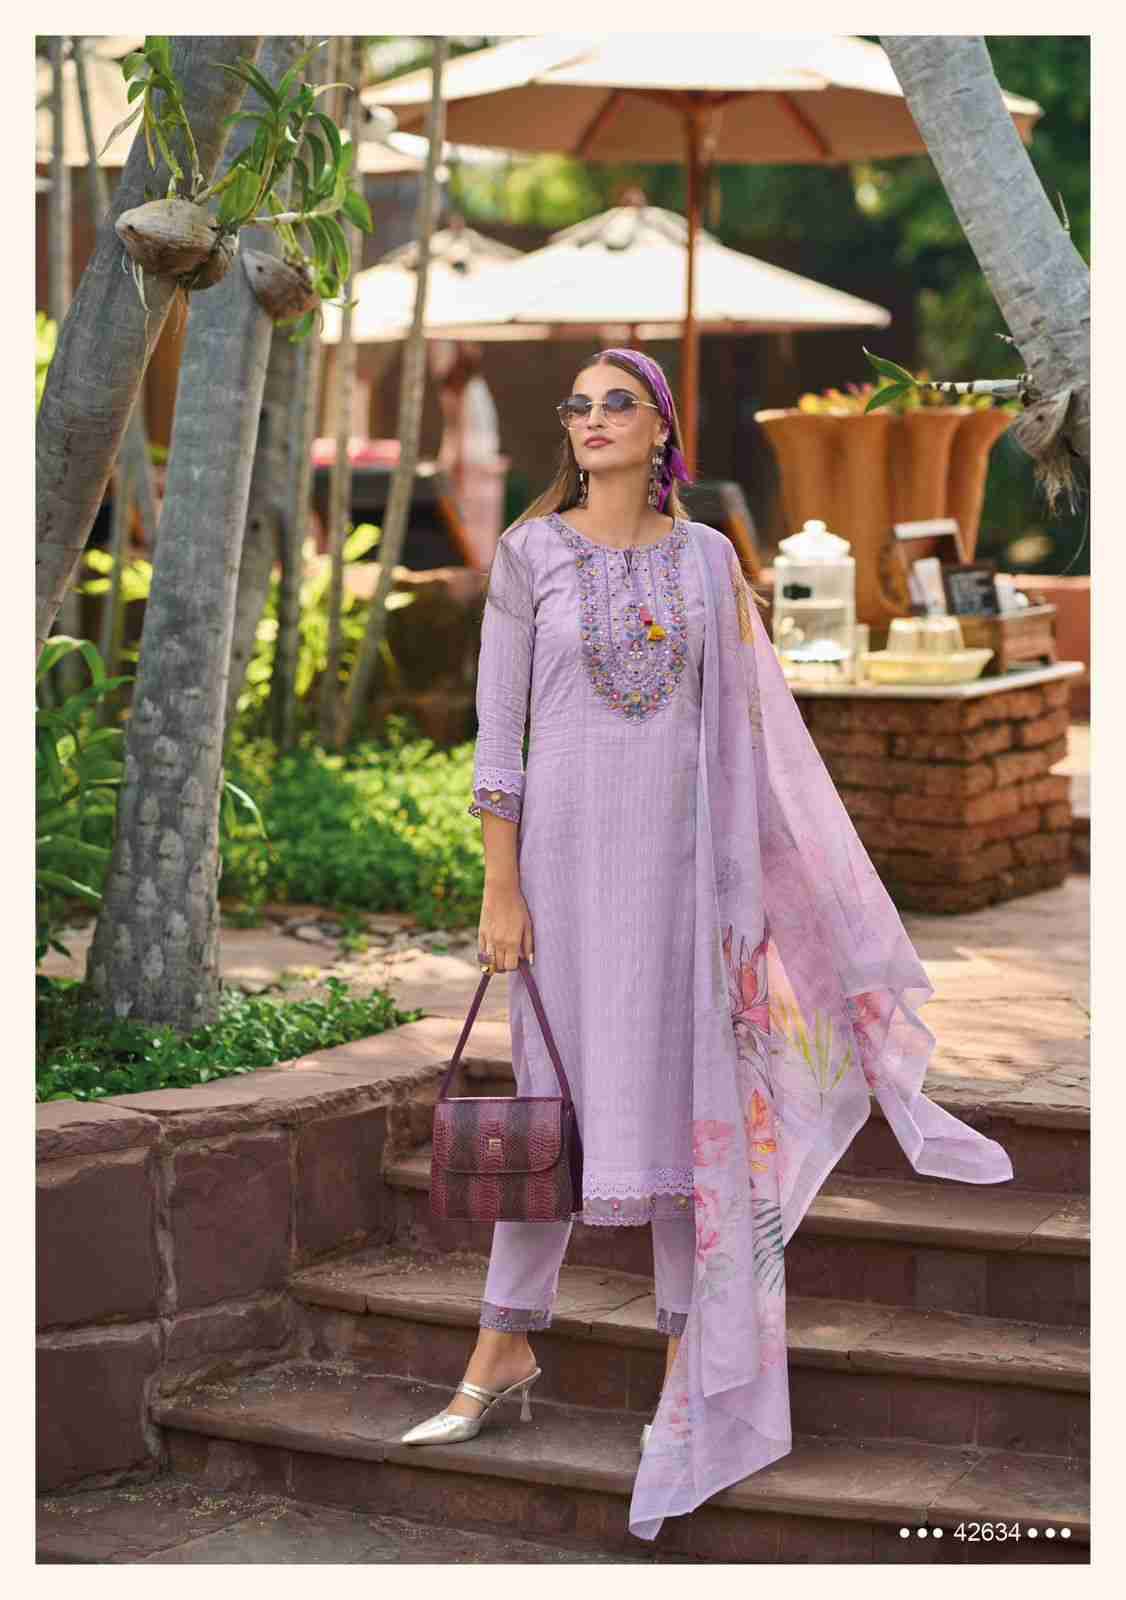 Summer Garden By Kailee 42631 To 42636 Series Designer Festive Suits Collection Beautiful Stylish Fancy Colorful Party Wear & Occasional Wear Pure Cotton Embroidered Dresses At Wholesale Price